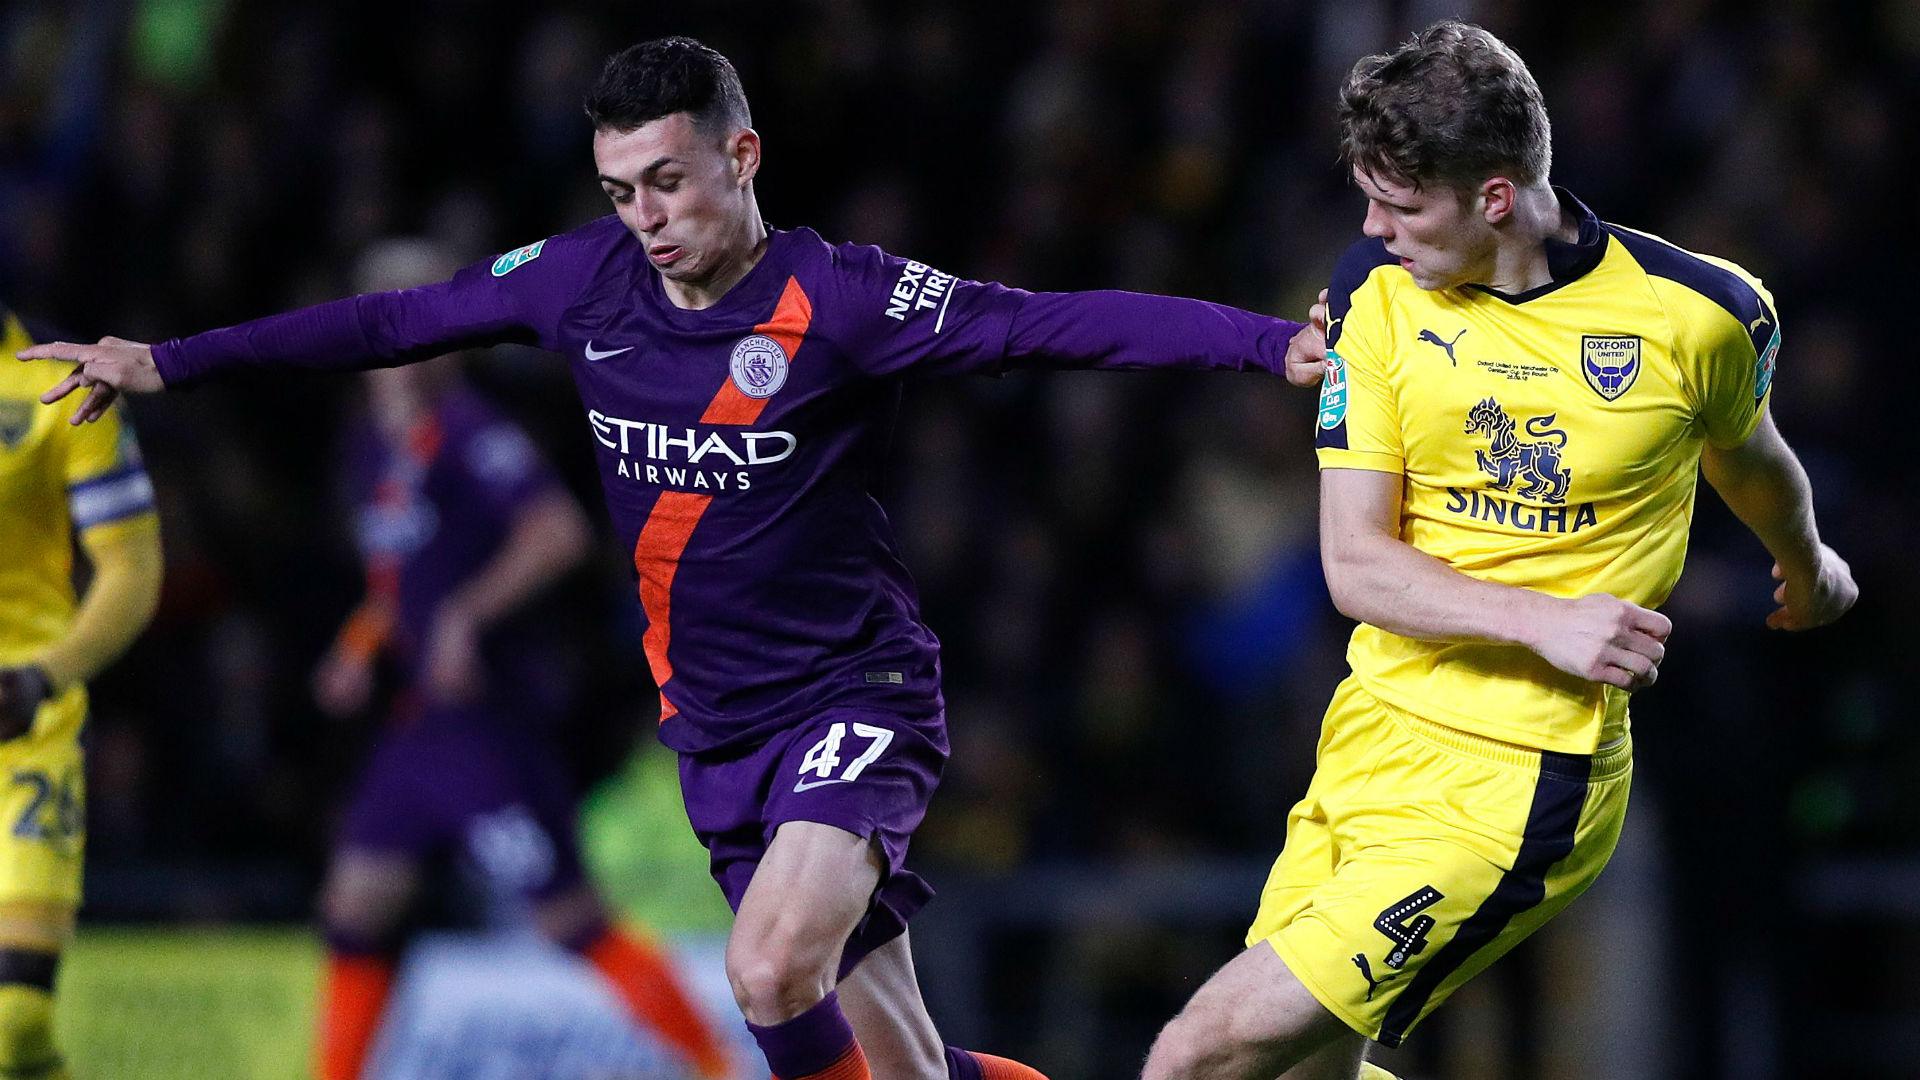 Genius' Phil Foden shines on latest Manchester City showing.